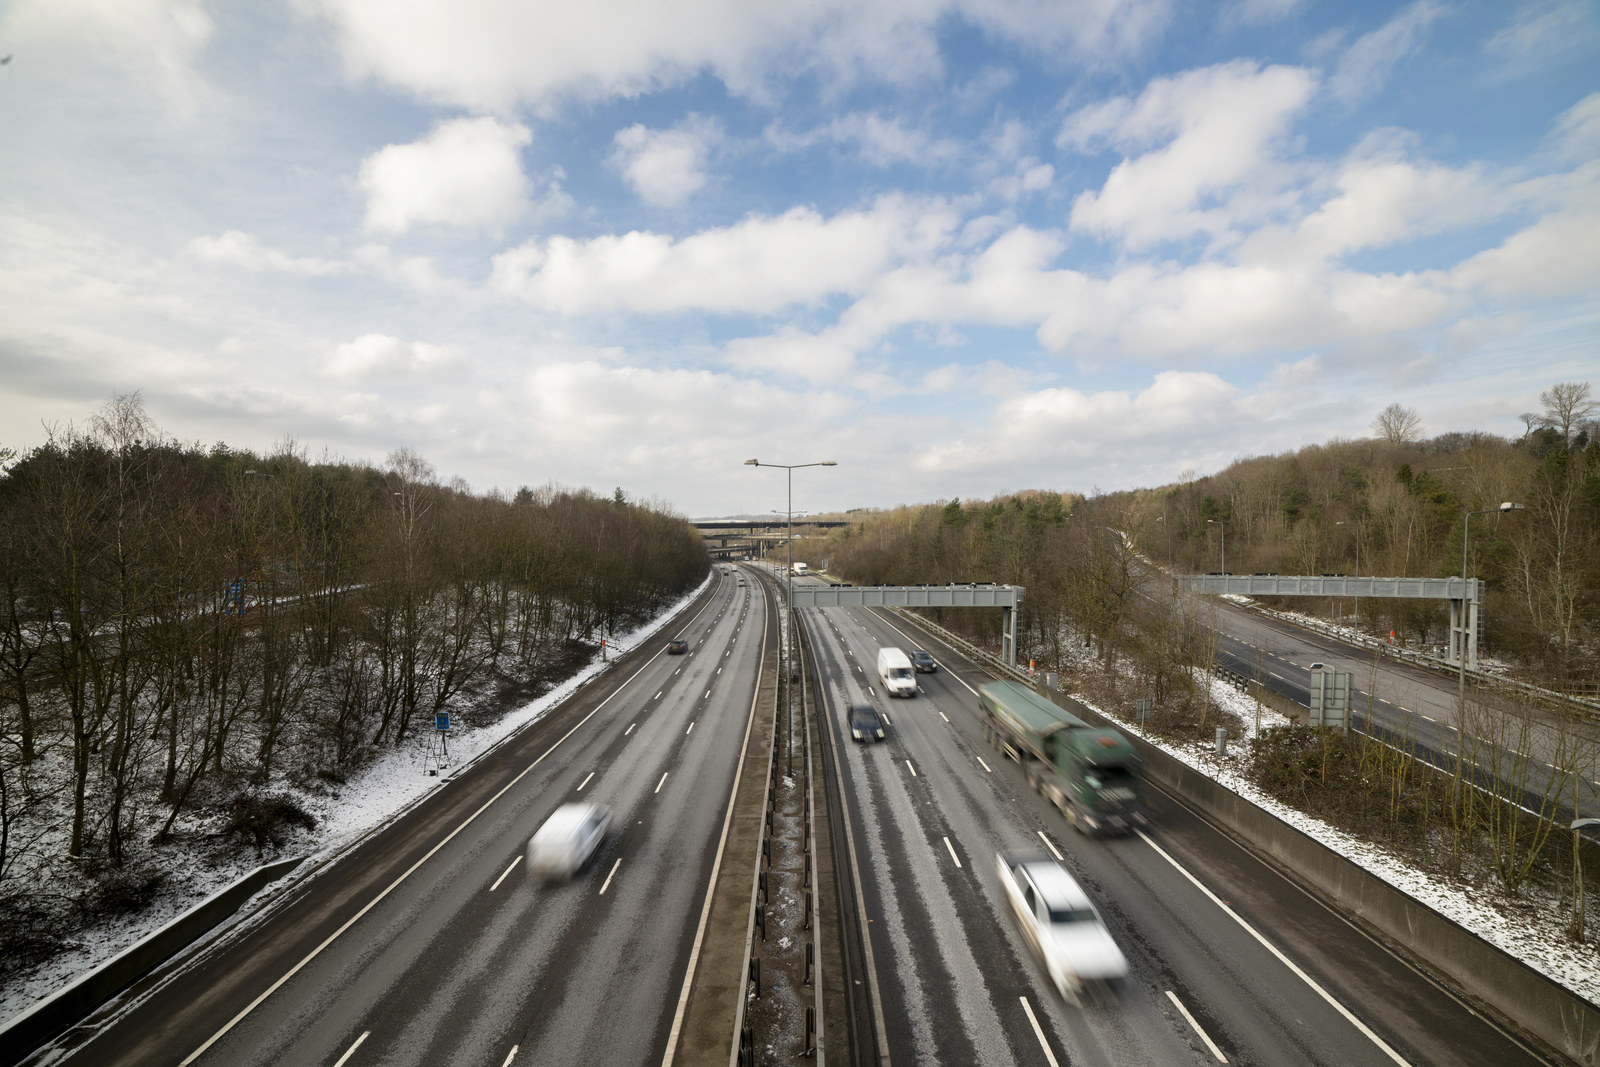 Wintery M25 with blurred vehicles driving along it